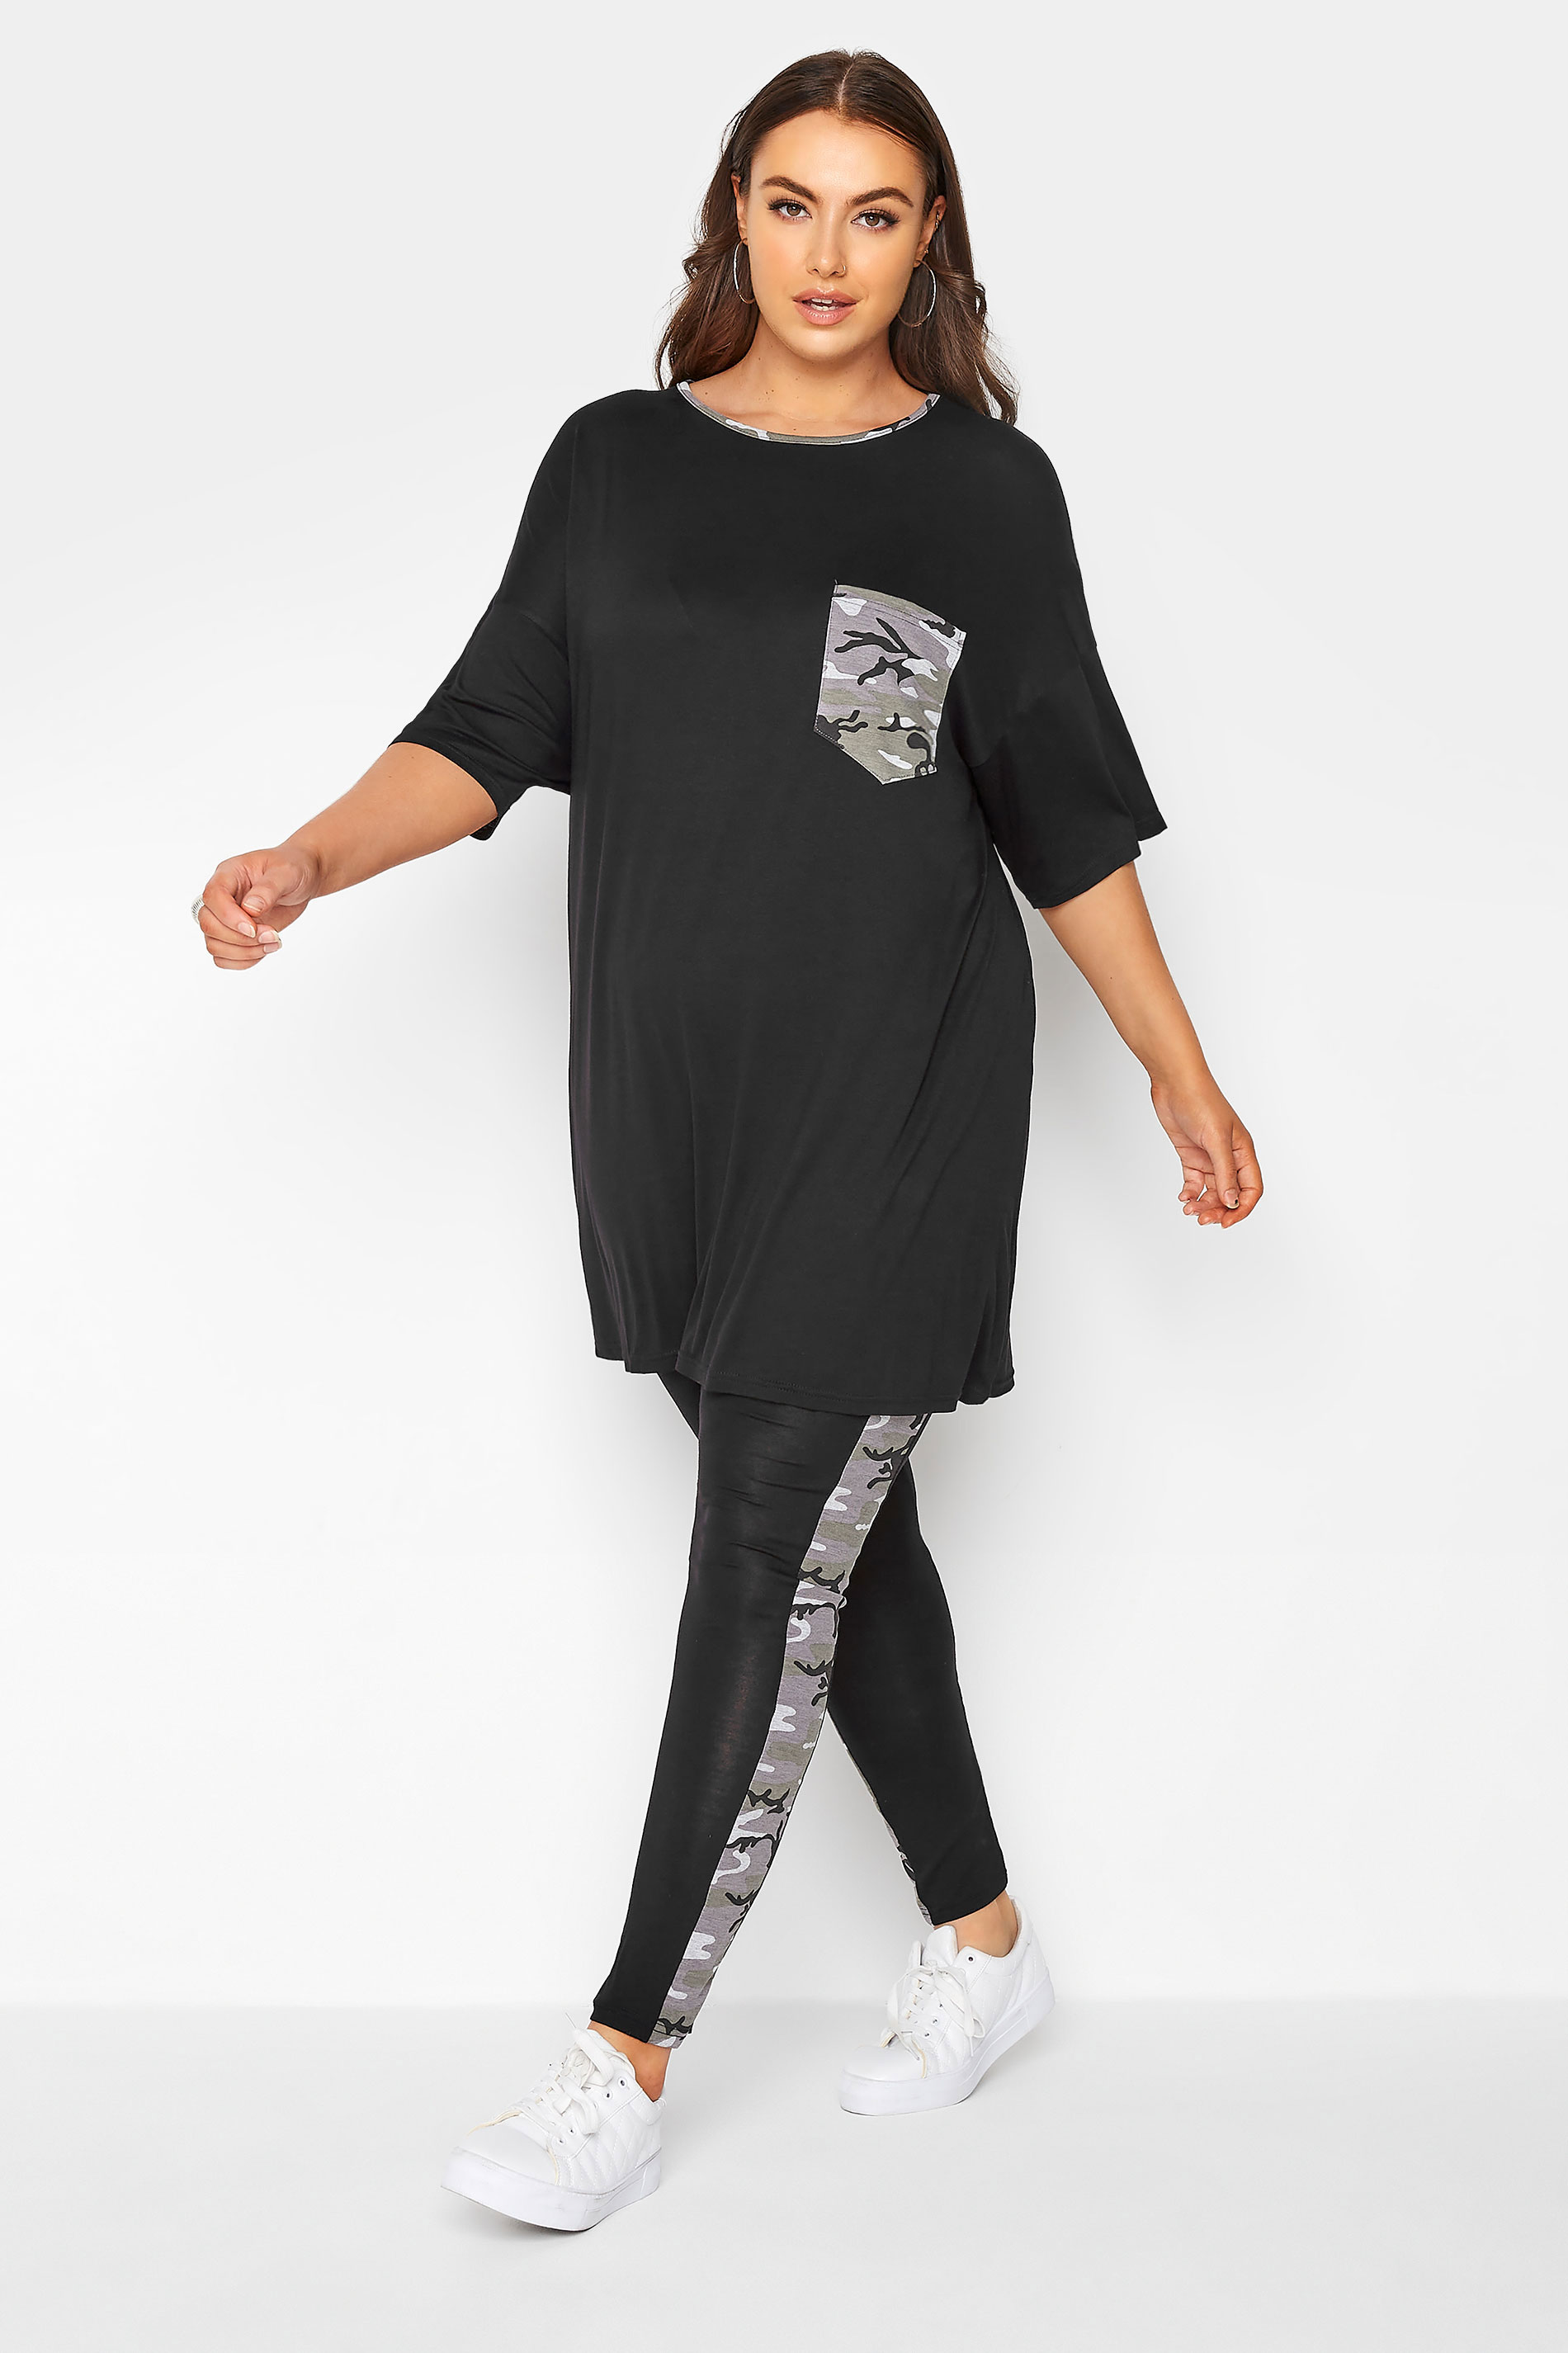 Grande taille  Tops Grande taille  T-Shirts | LIMITED COLLECTION - T-Shirt Noir Poche Contrasté - TS40113